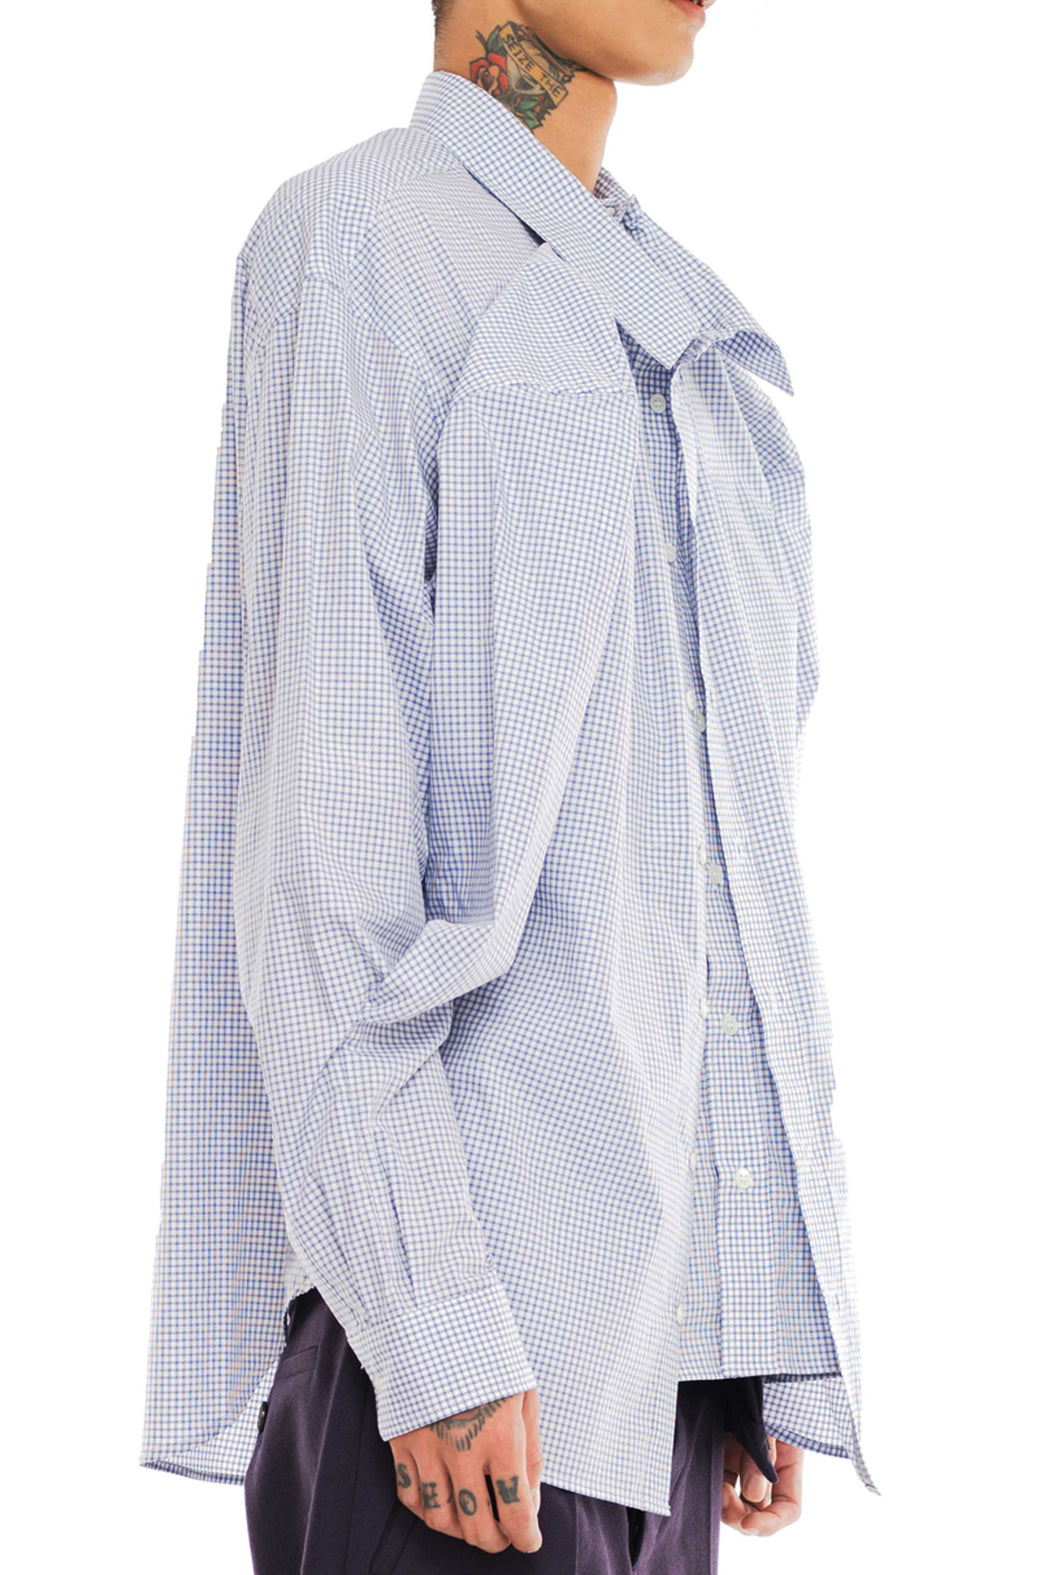 Double Front Shirt - Blue Check